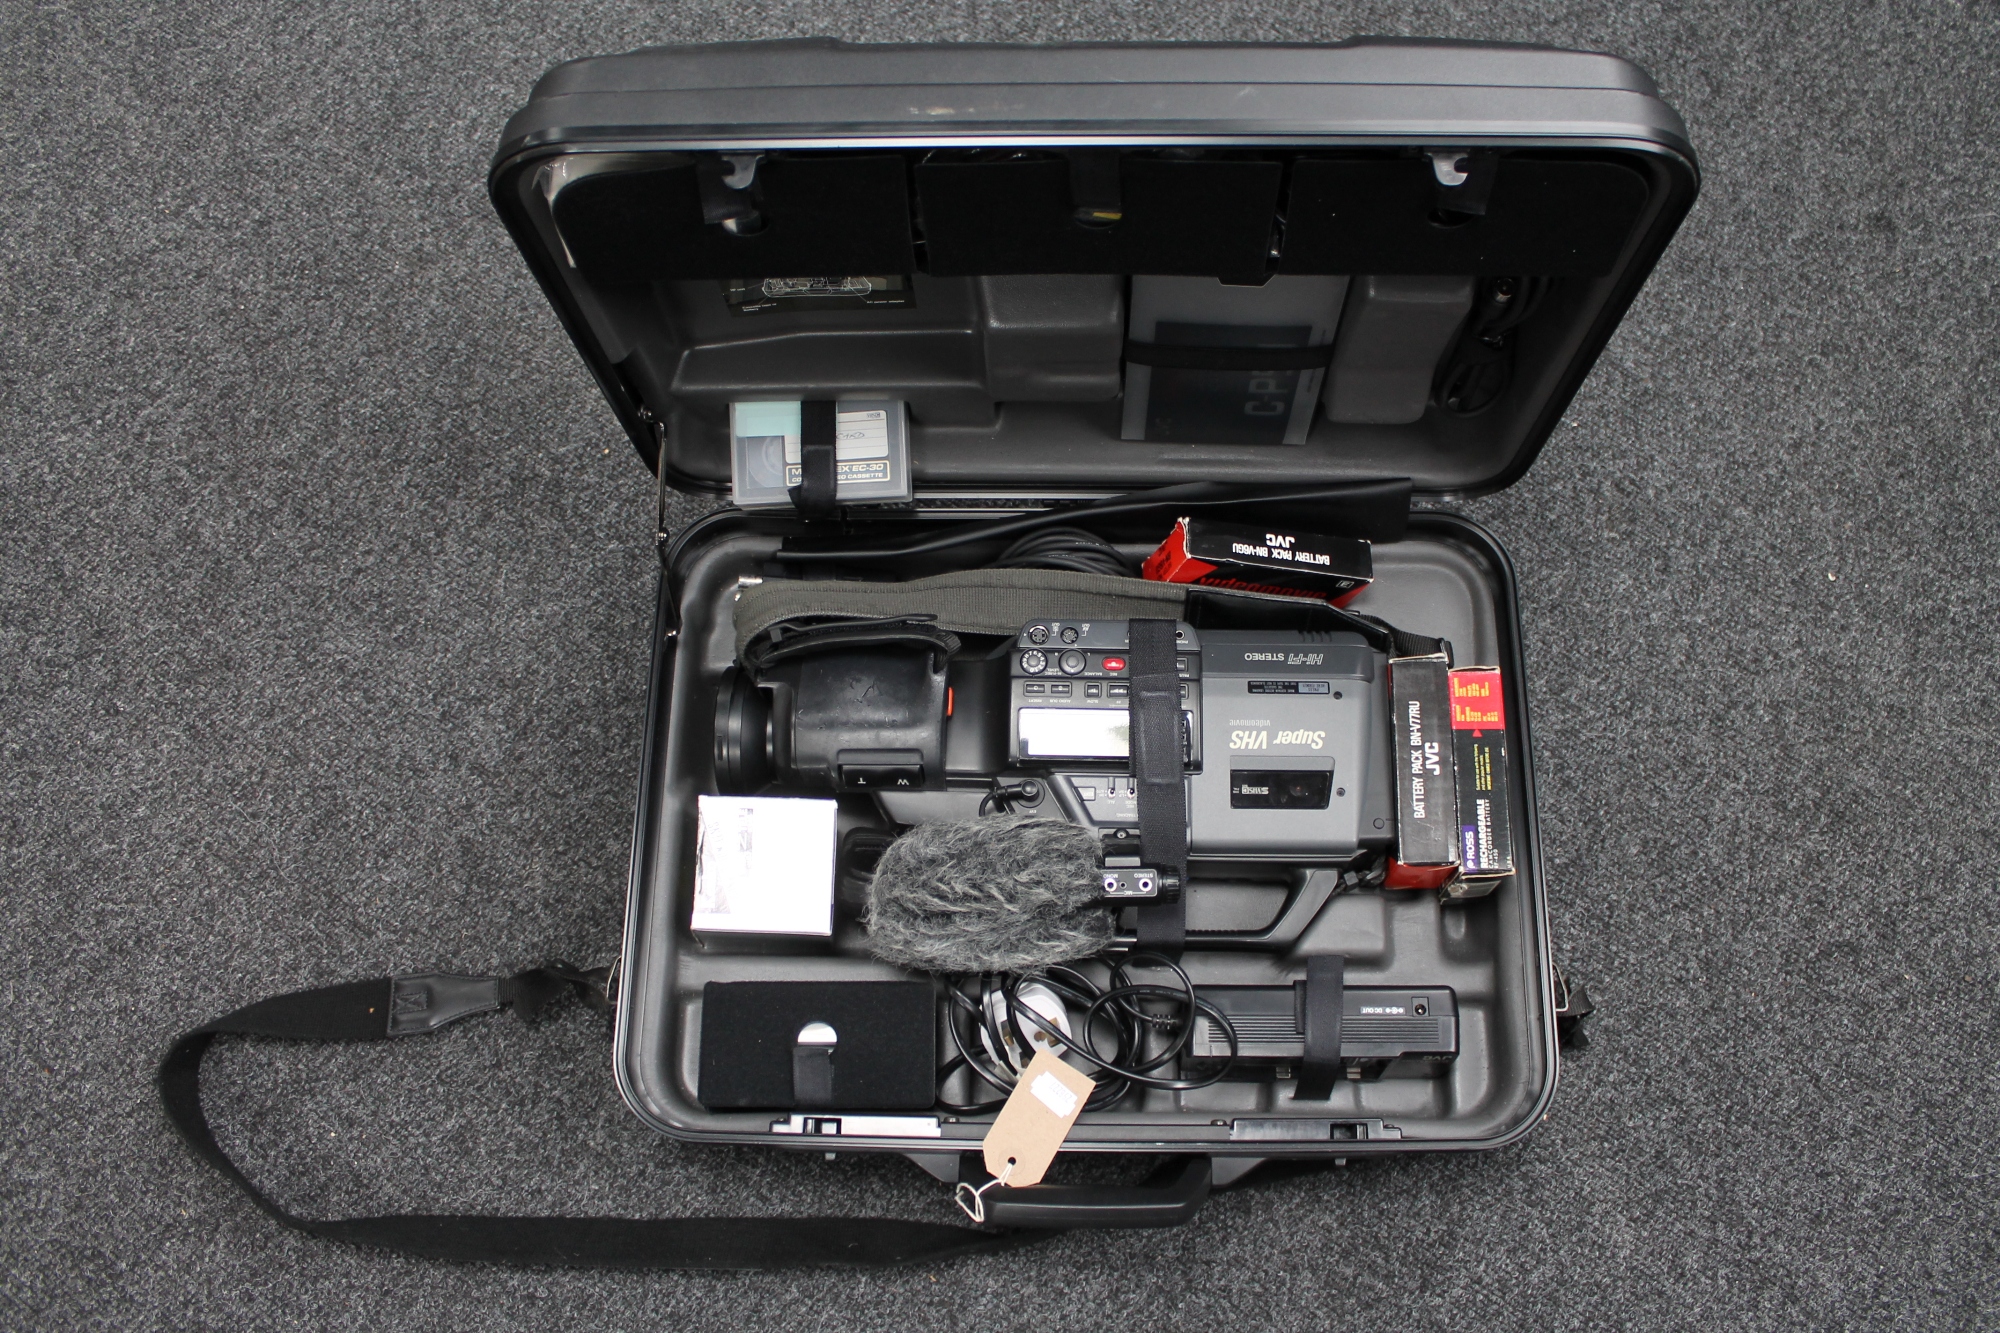 A JVC video camera in case with accessories